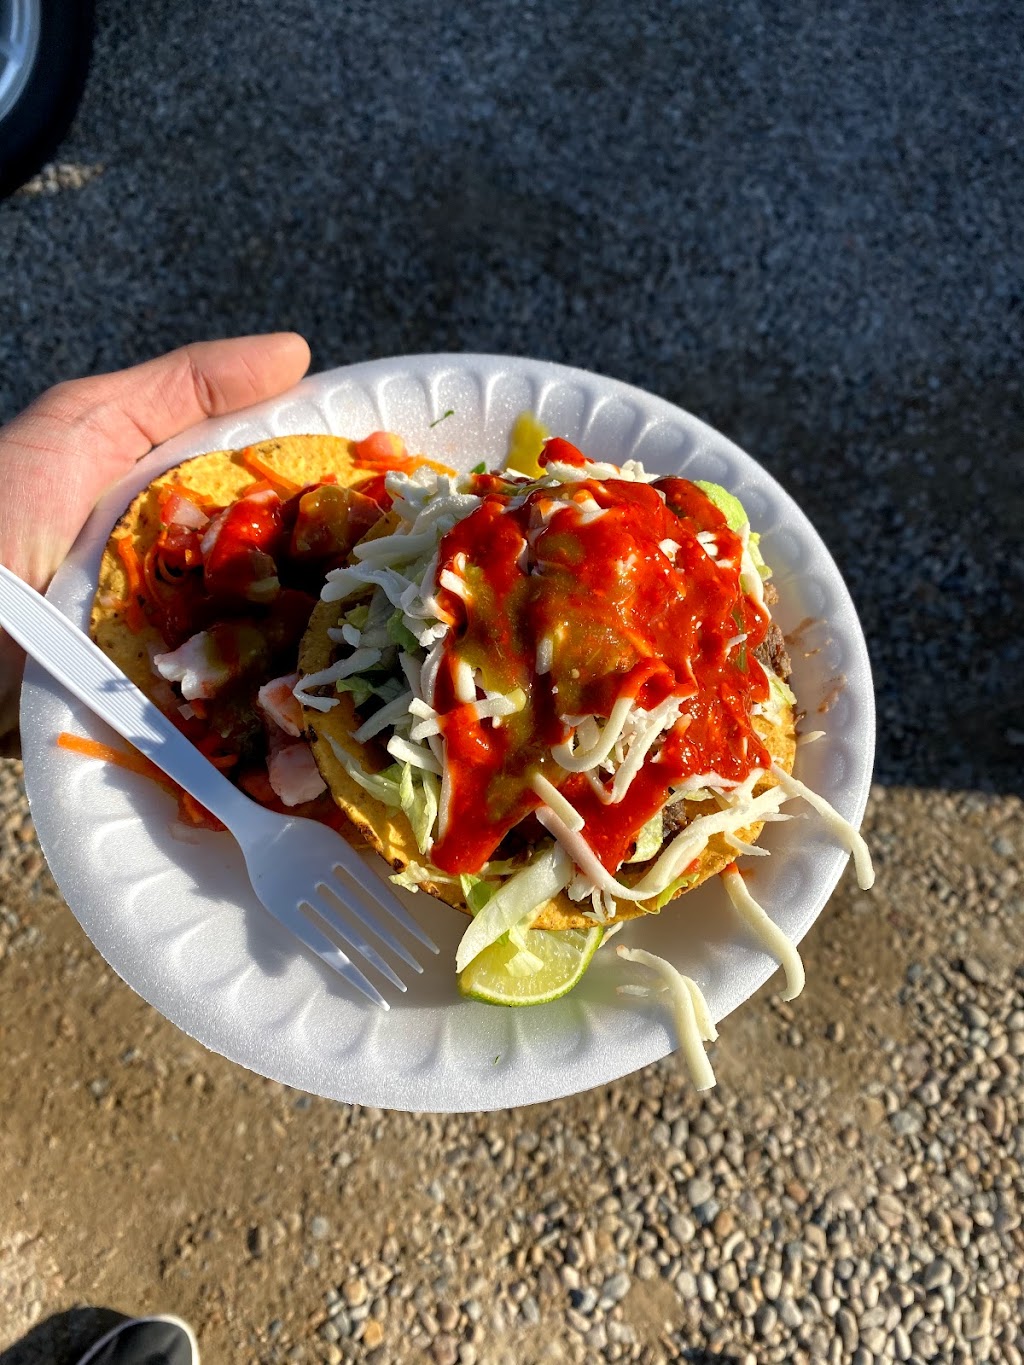 Tacos Colima Taco Truck | restaurant | 1302 Paynter Ave, Caldwell, ID 83605, USA | 2089688808 OR +1 208-968-8808